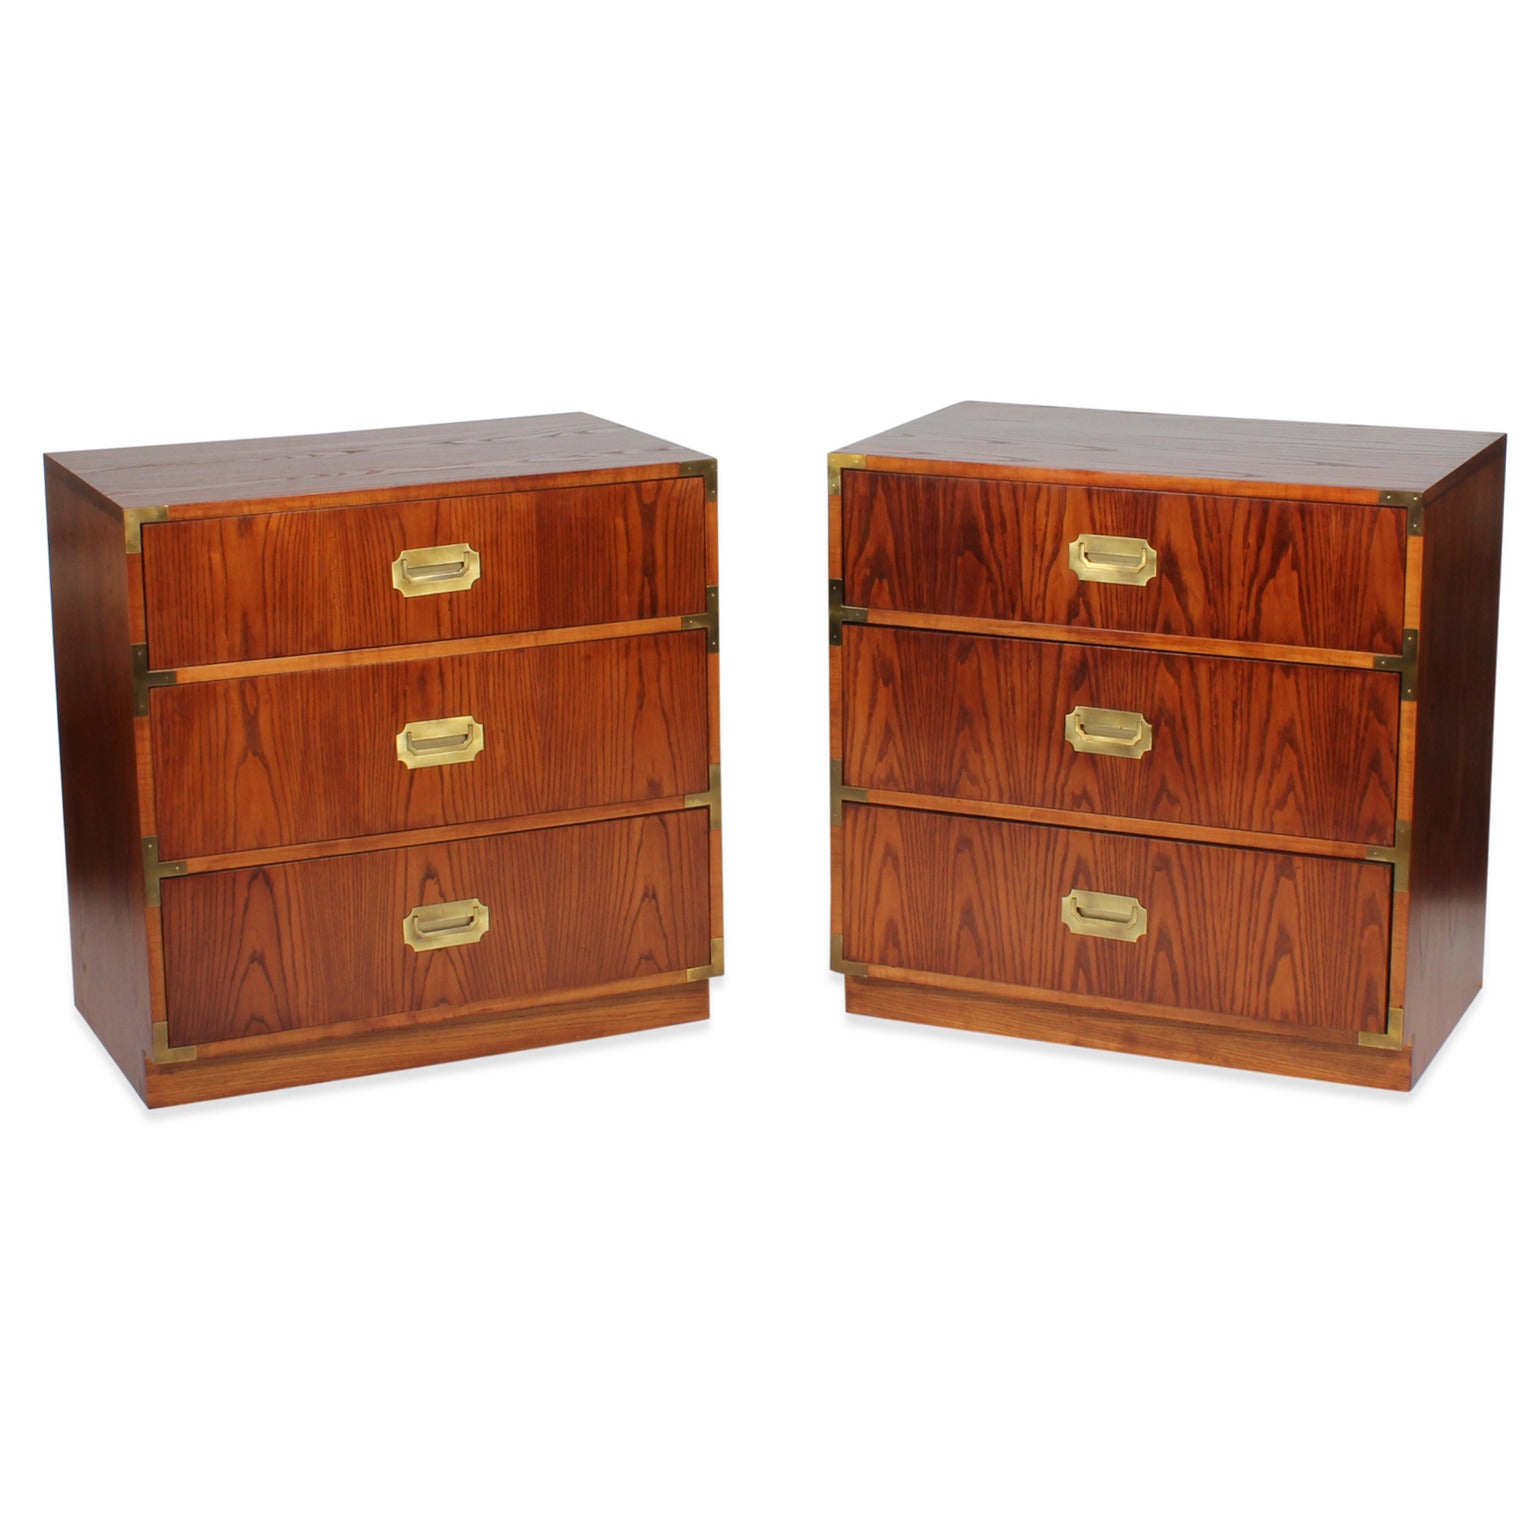 A Pair of Fruitwood Campaign Style Chests